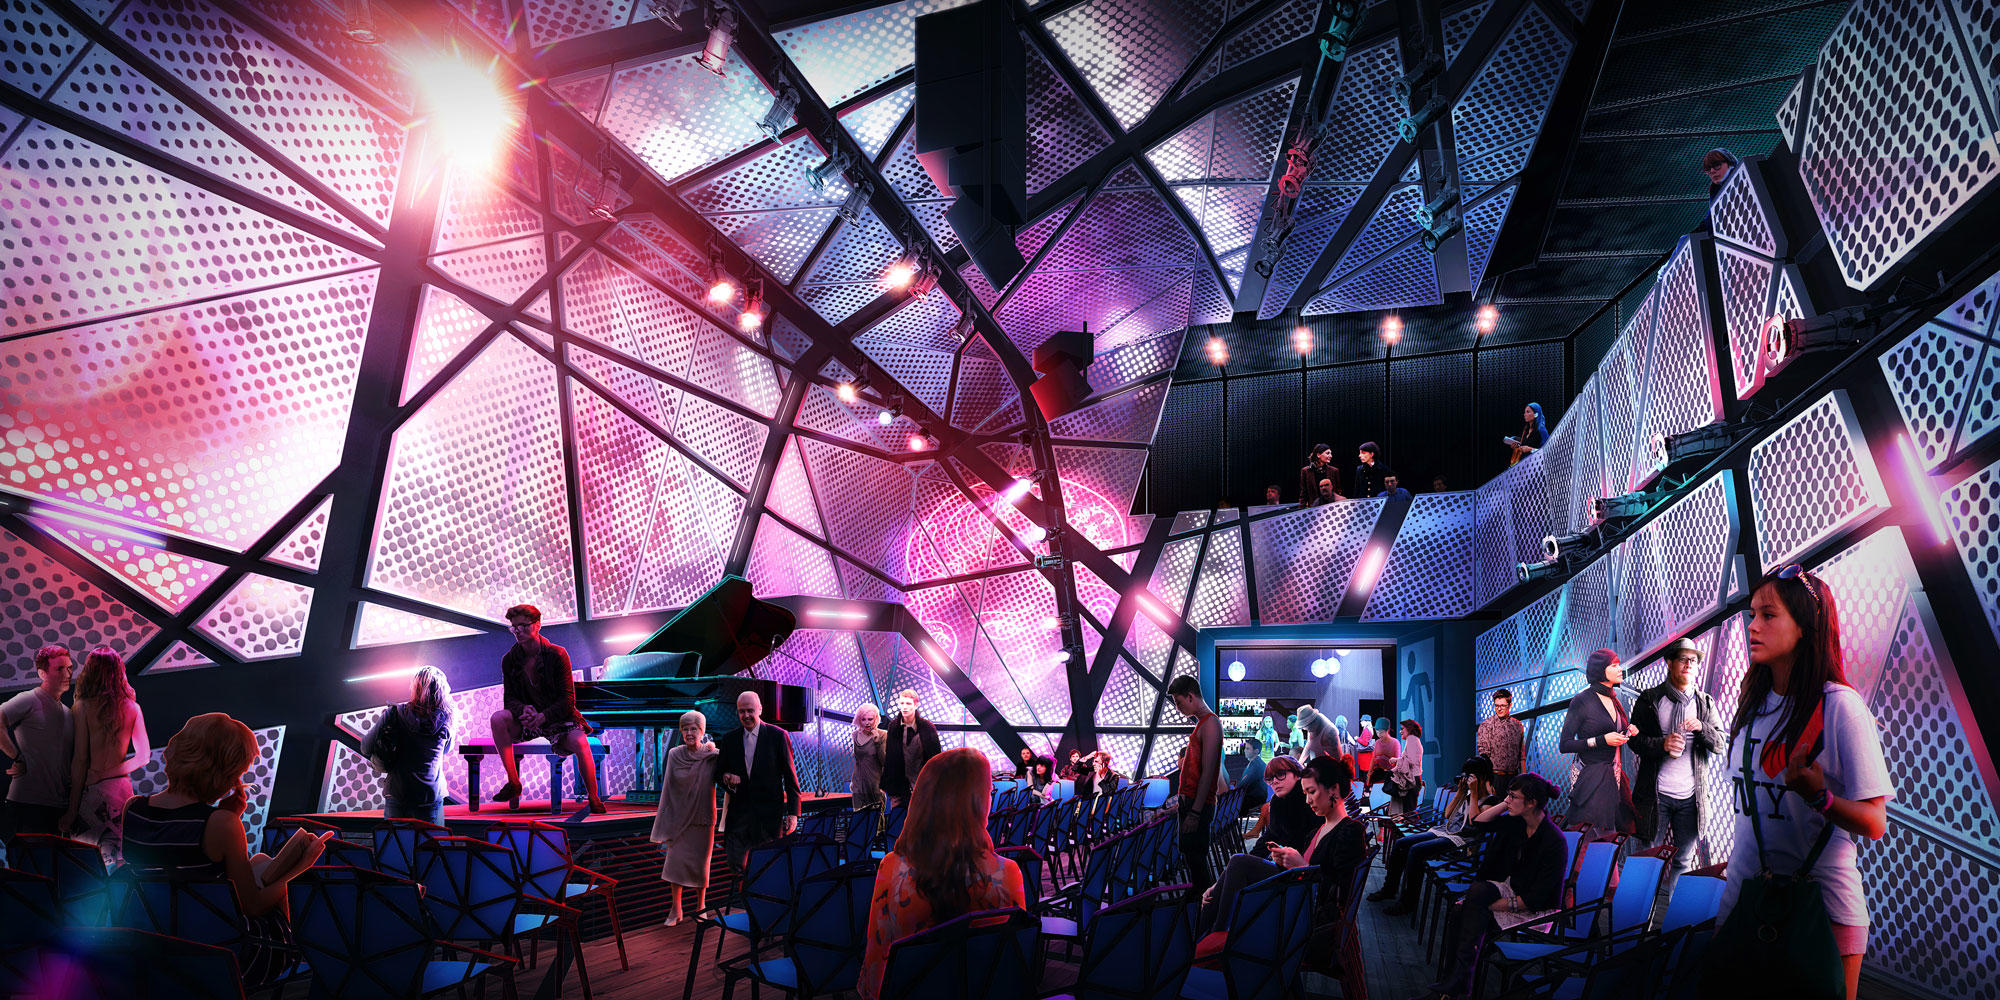 National Sawdust building